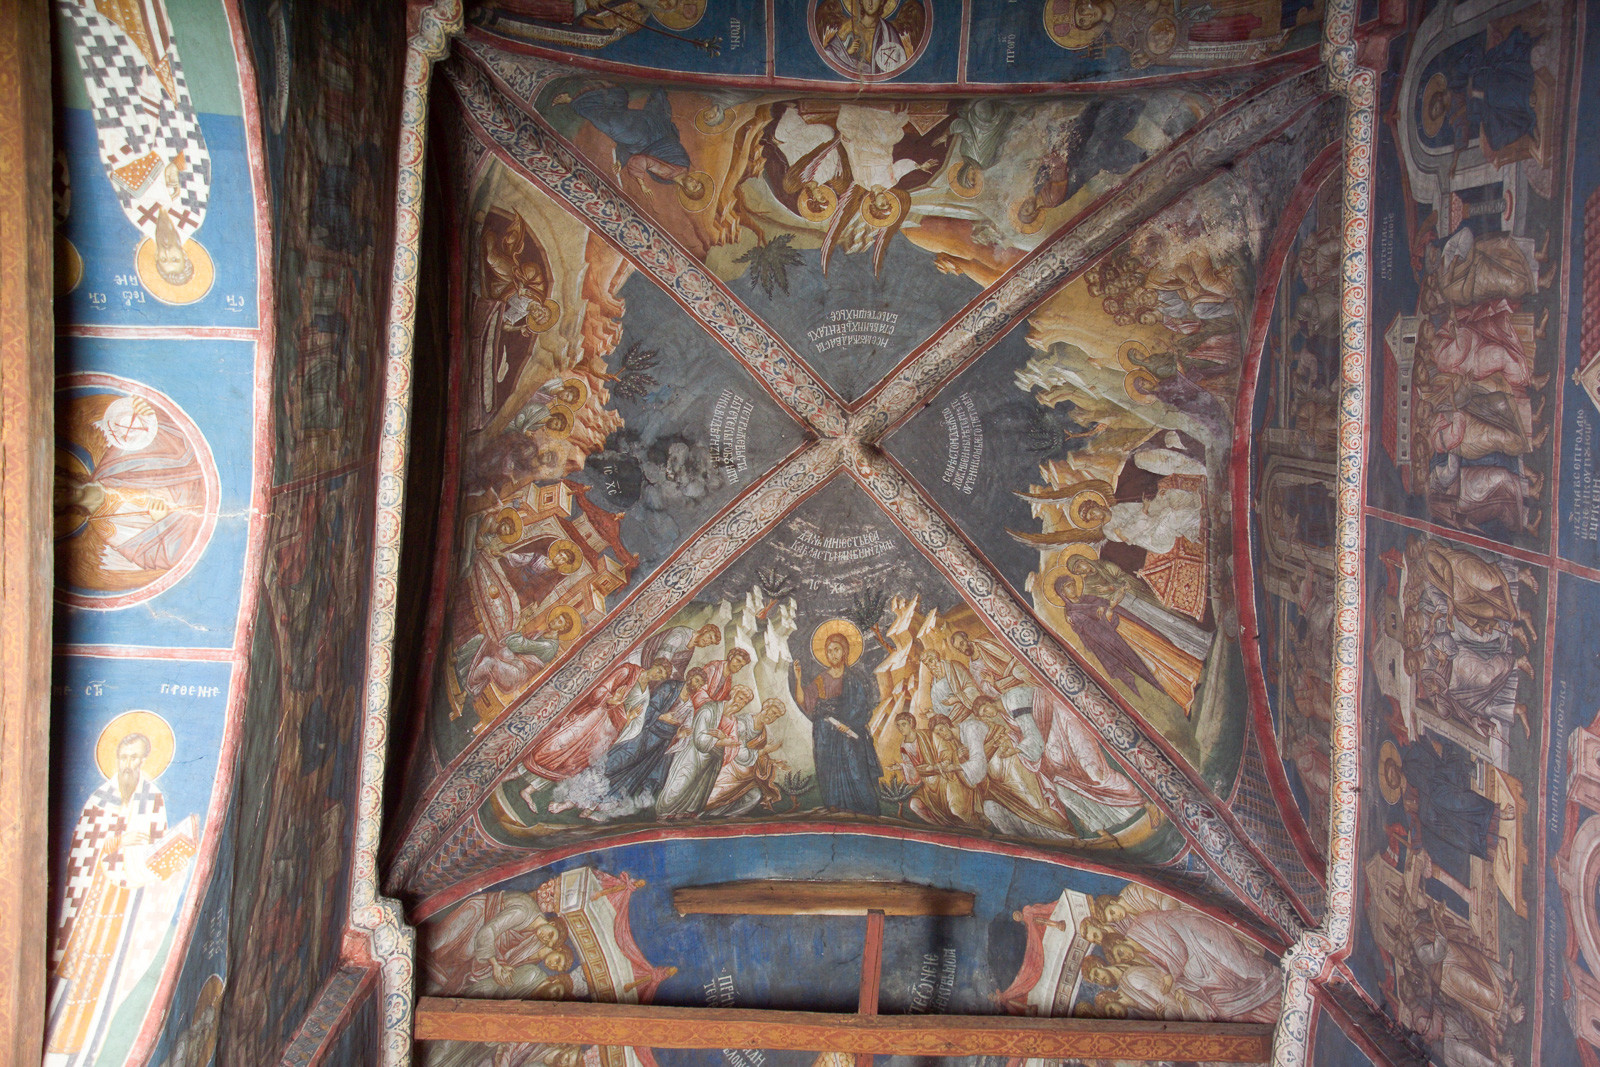 43,44,45,46 Altar Vault with frescoes from the cycle of events after the Resurrection